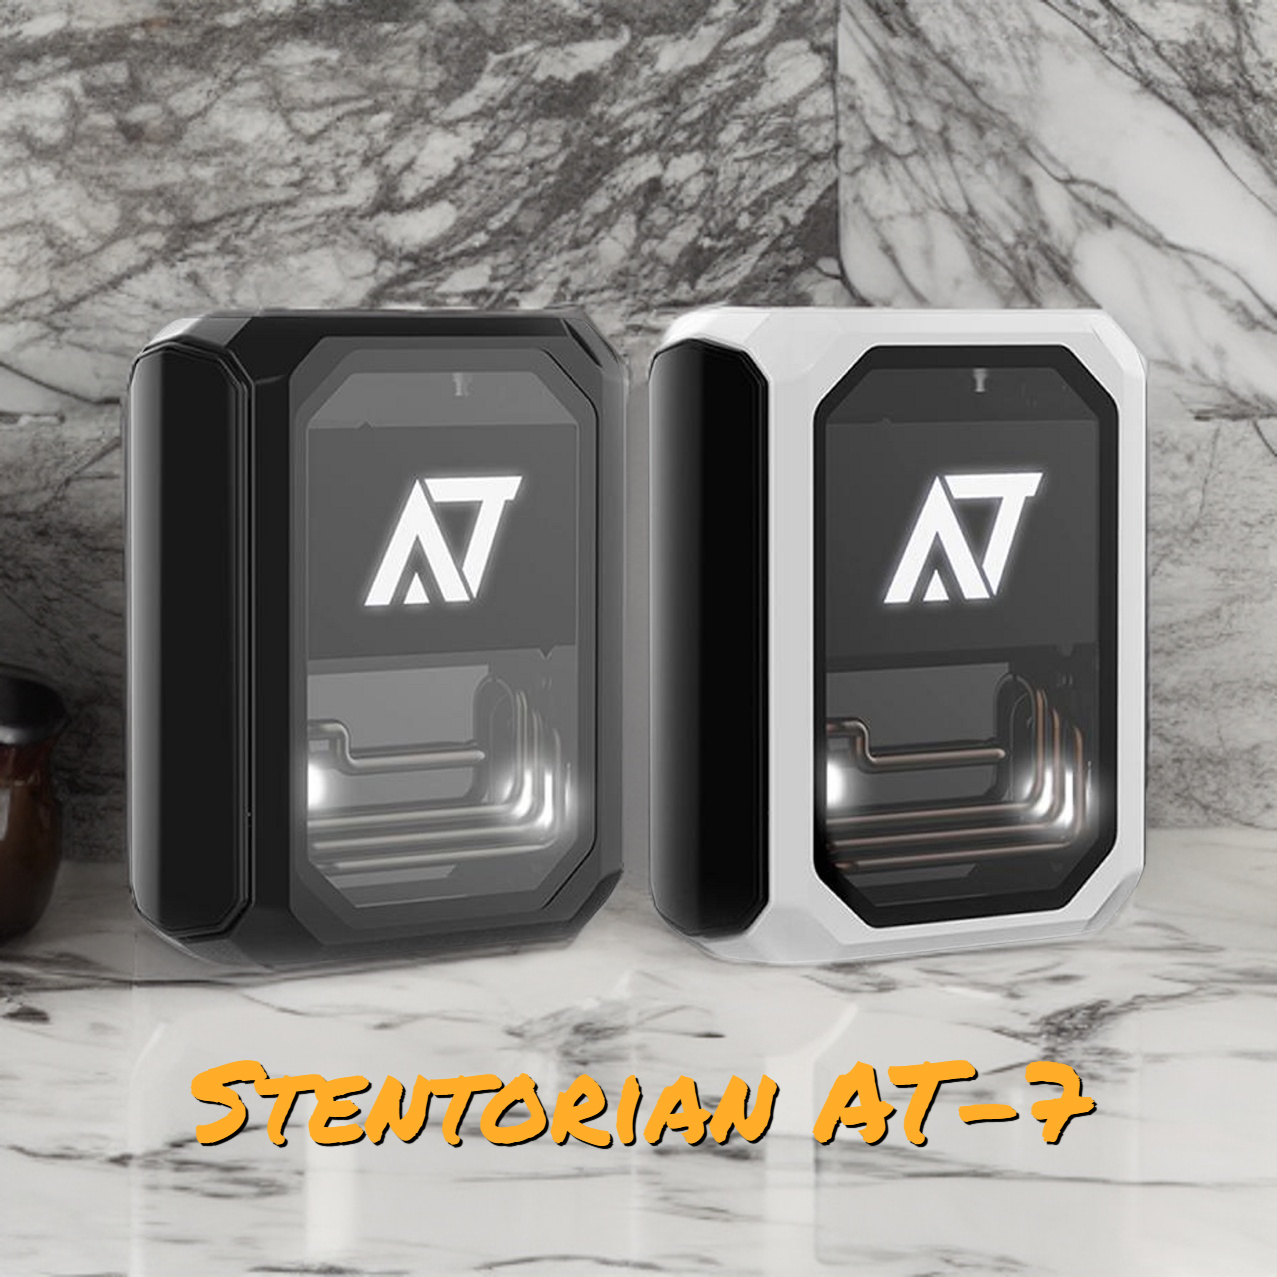 Stentorian AT-7 PC Gaming-Inspired 100W Box Mod